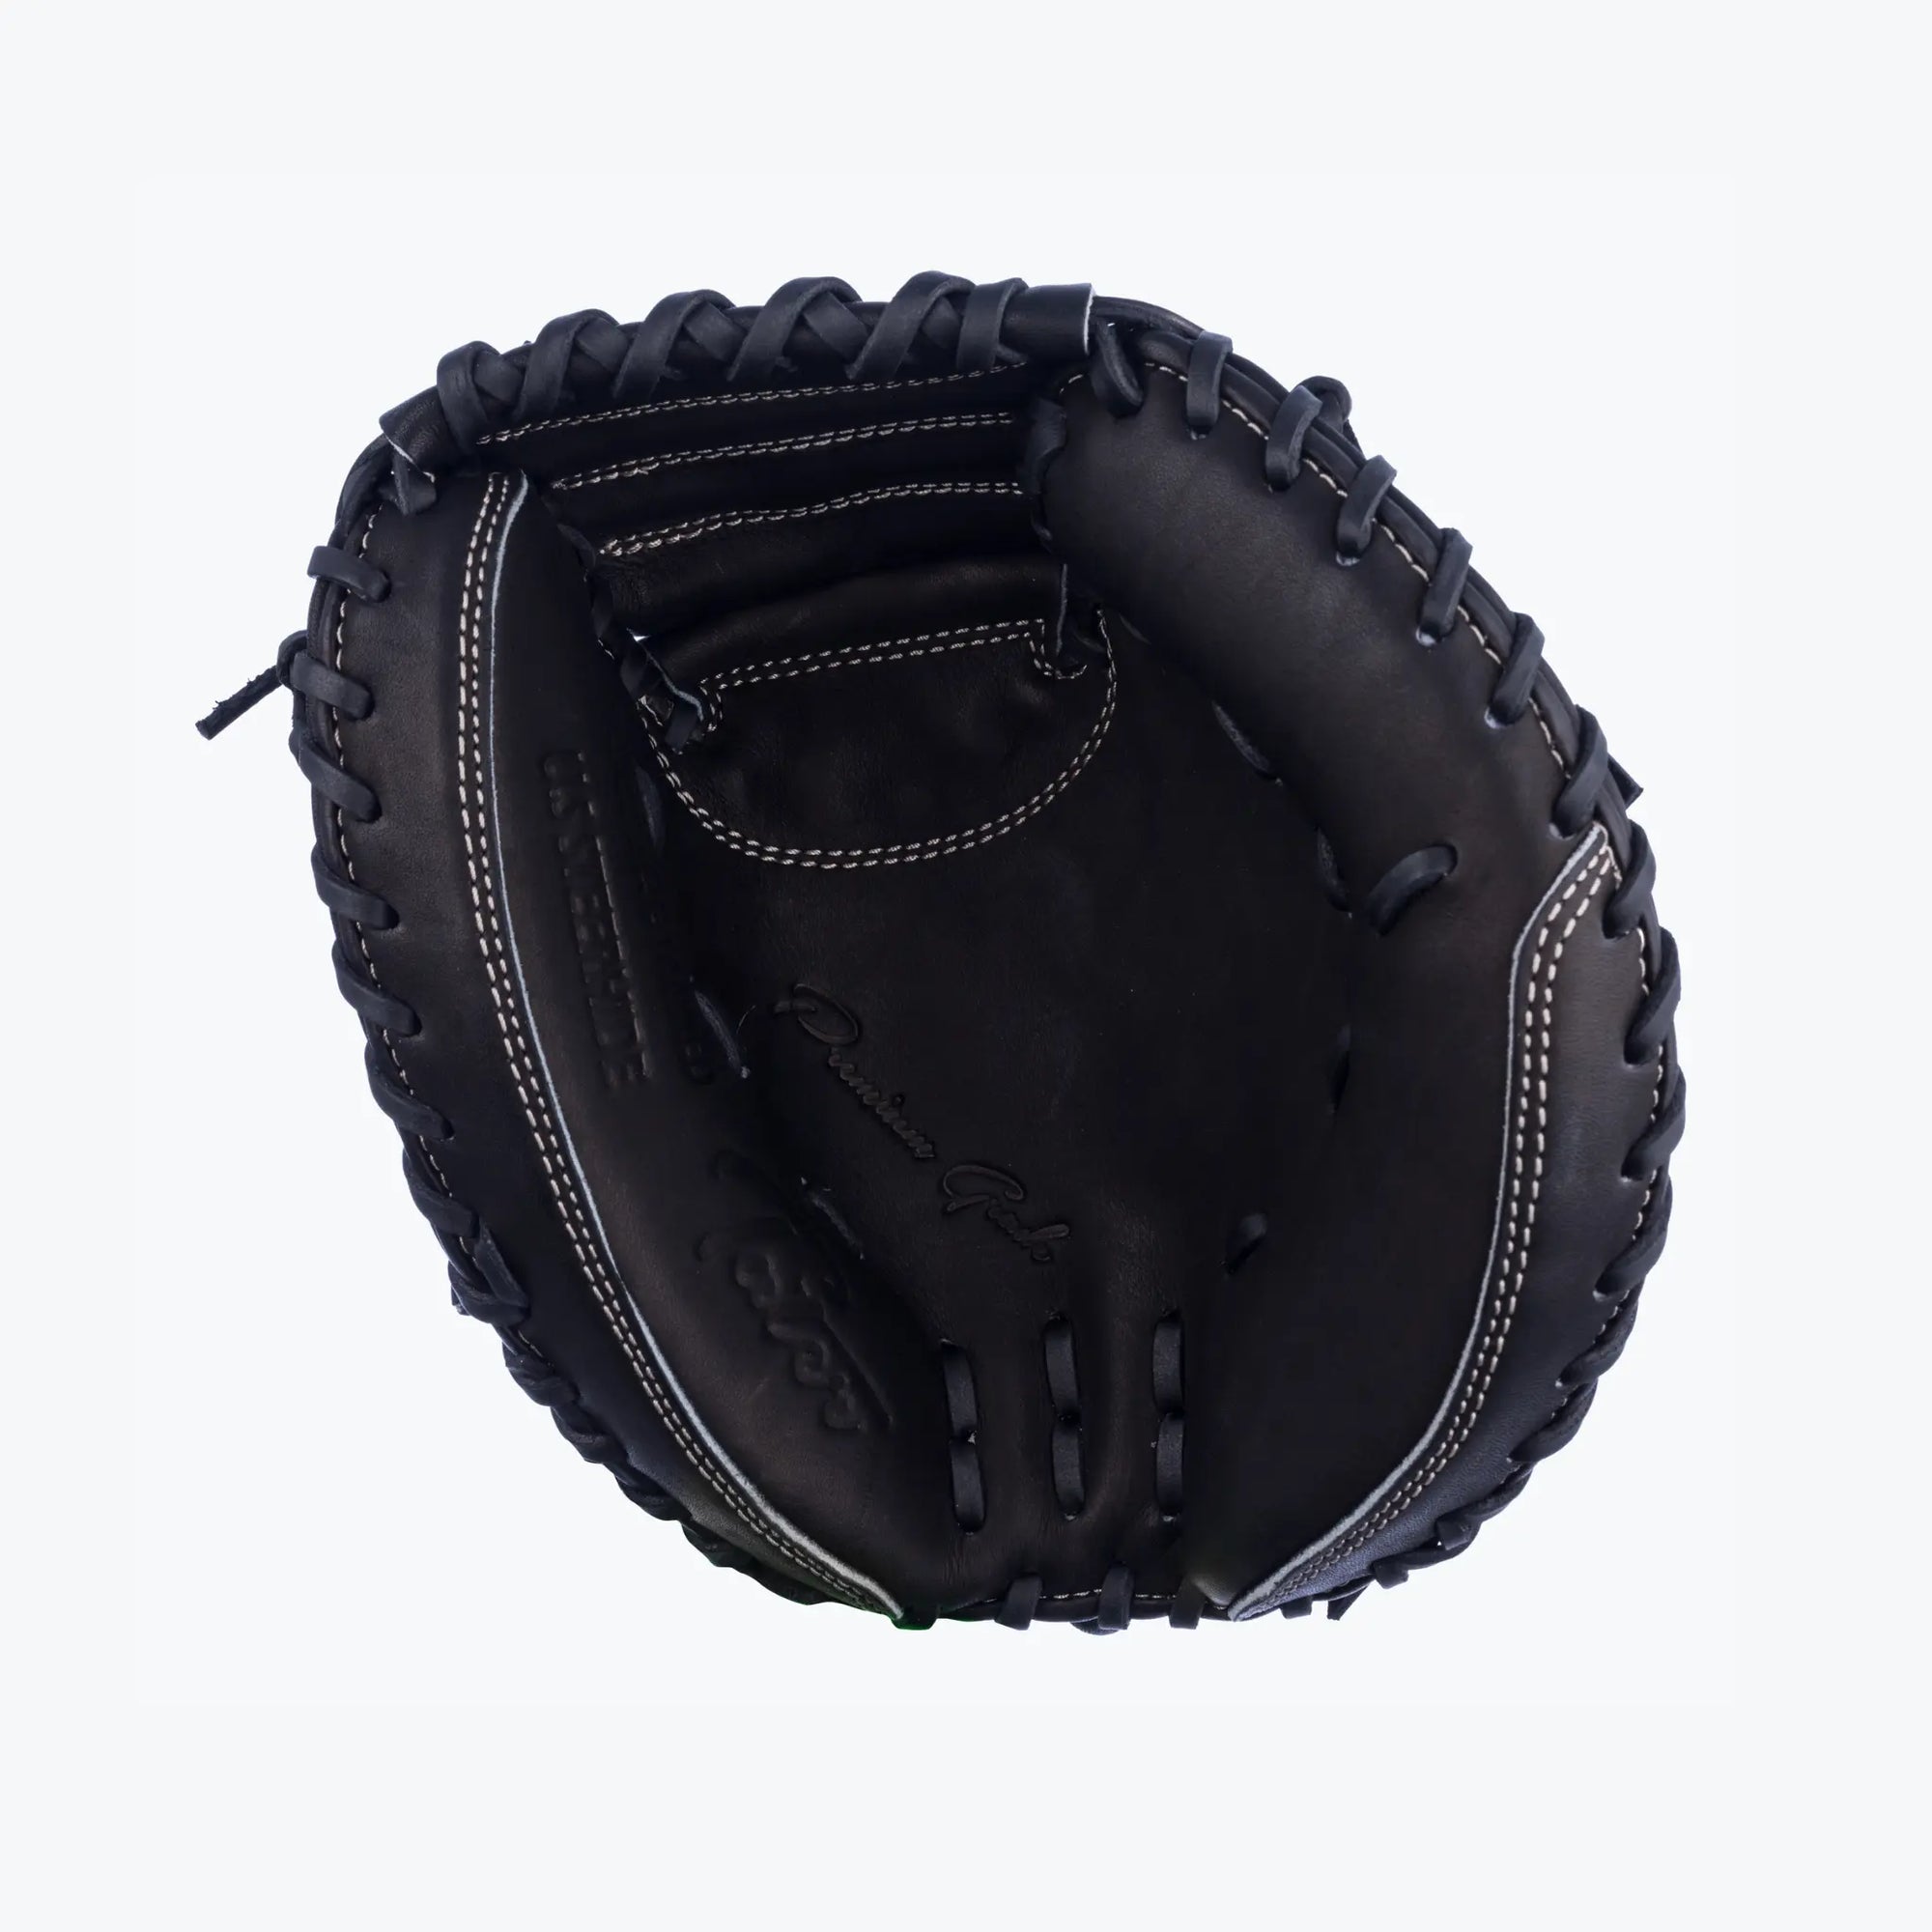 The image captures a Tater Baseball 28-inch Mini Catcher's Mitt Trainer, designed in classic black with stylish white stitching and logo detail. Its small pocket is perfect for training catchers to secure and handle the ball with precision. Ideal for refining skills on the field.